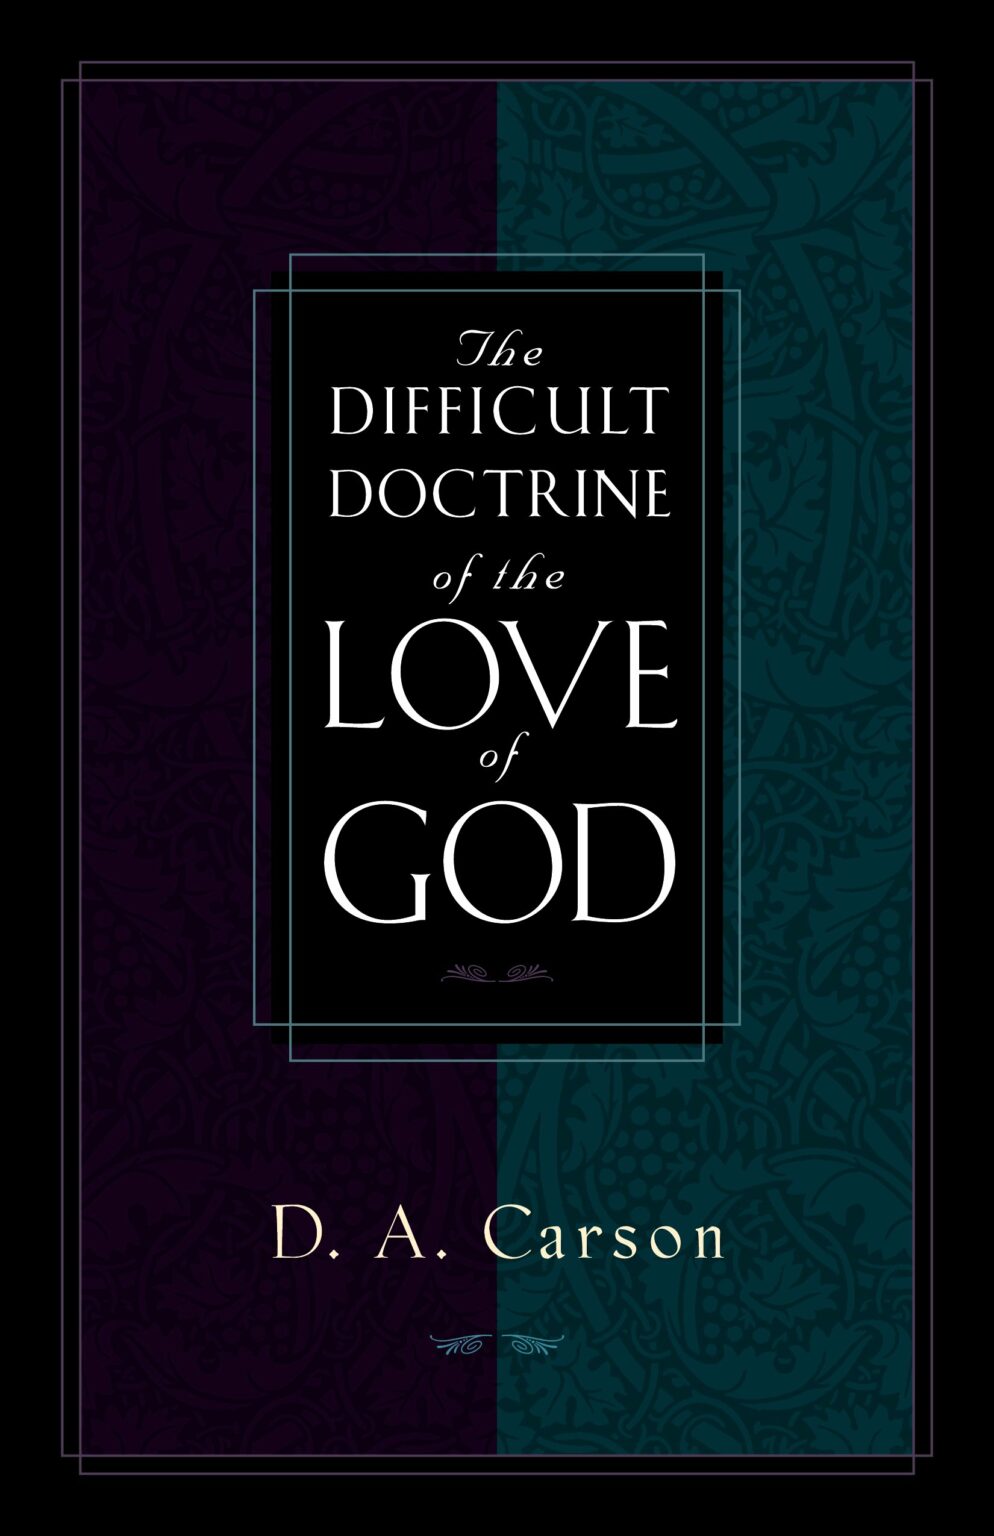 The Difficult Doctrine Of The Love Of God By D. A. Carson 994x1536 